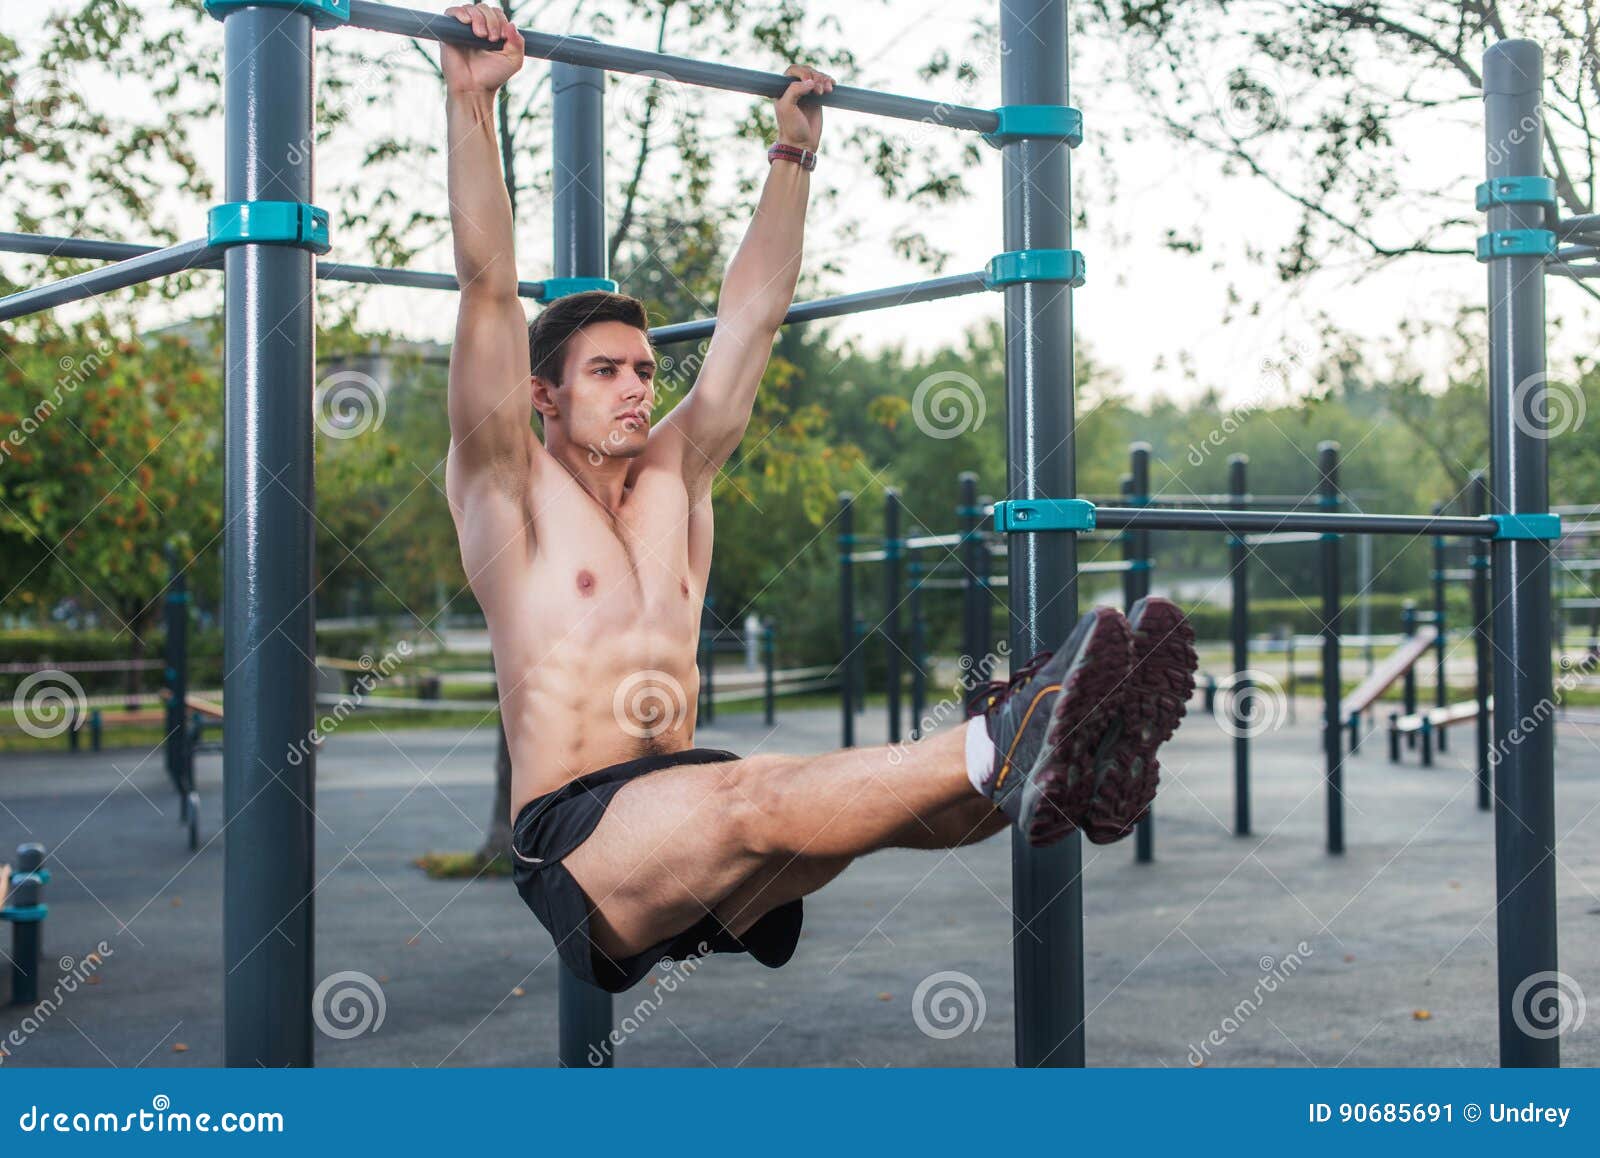 young fitness man doing hanging leg raises exercise working out his abs in the park.